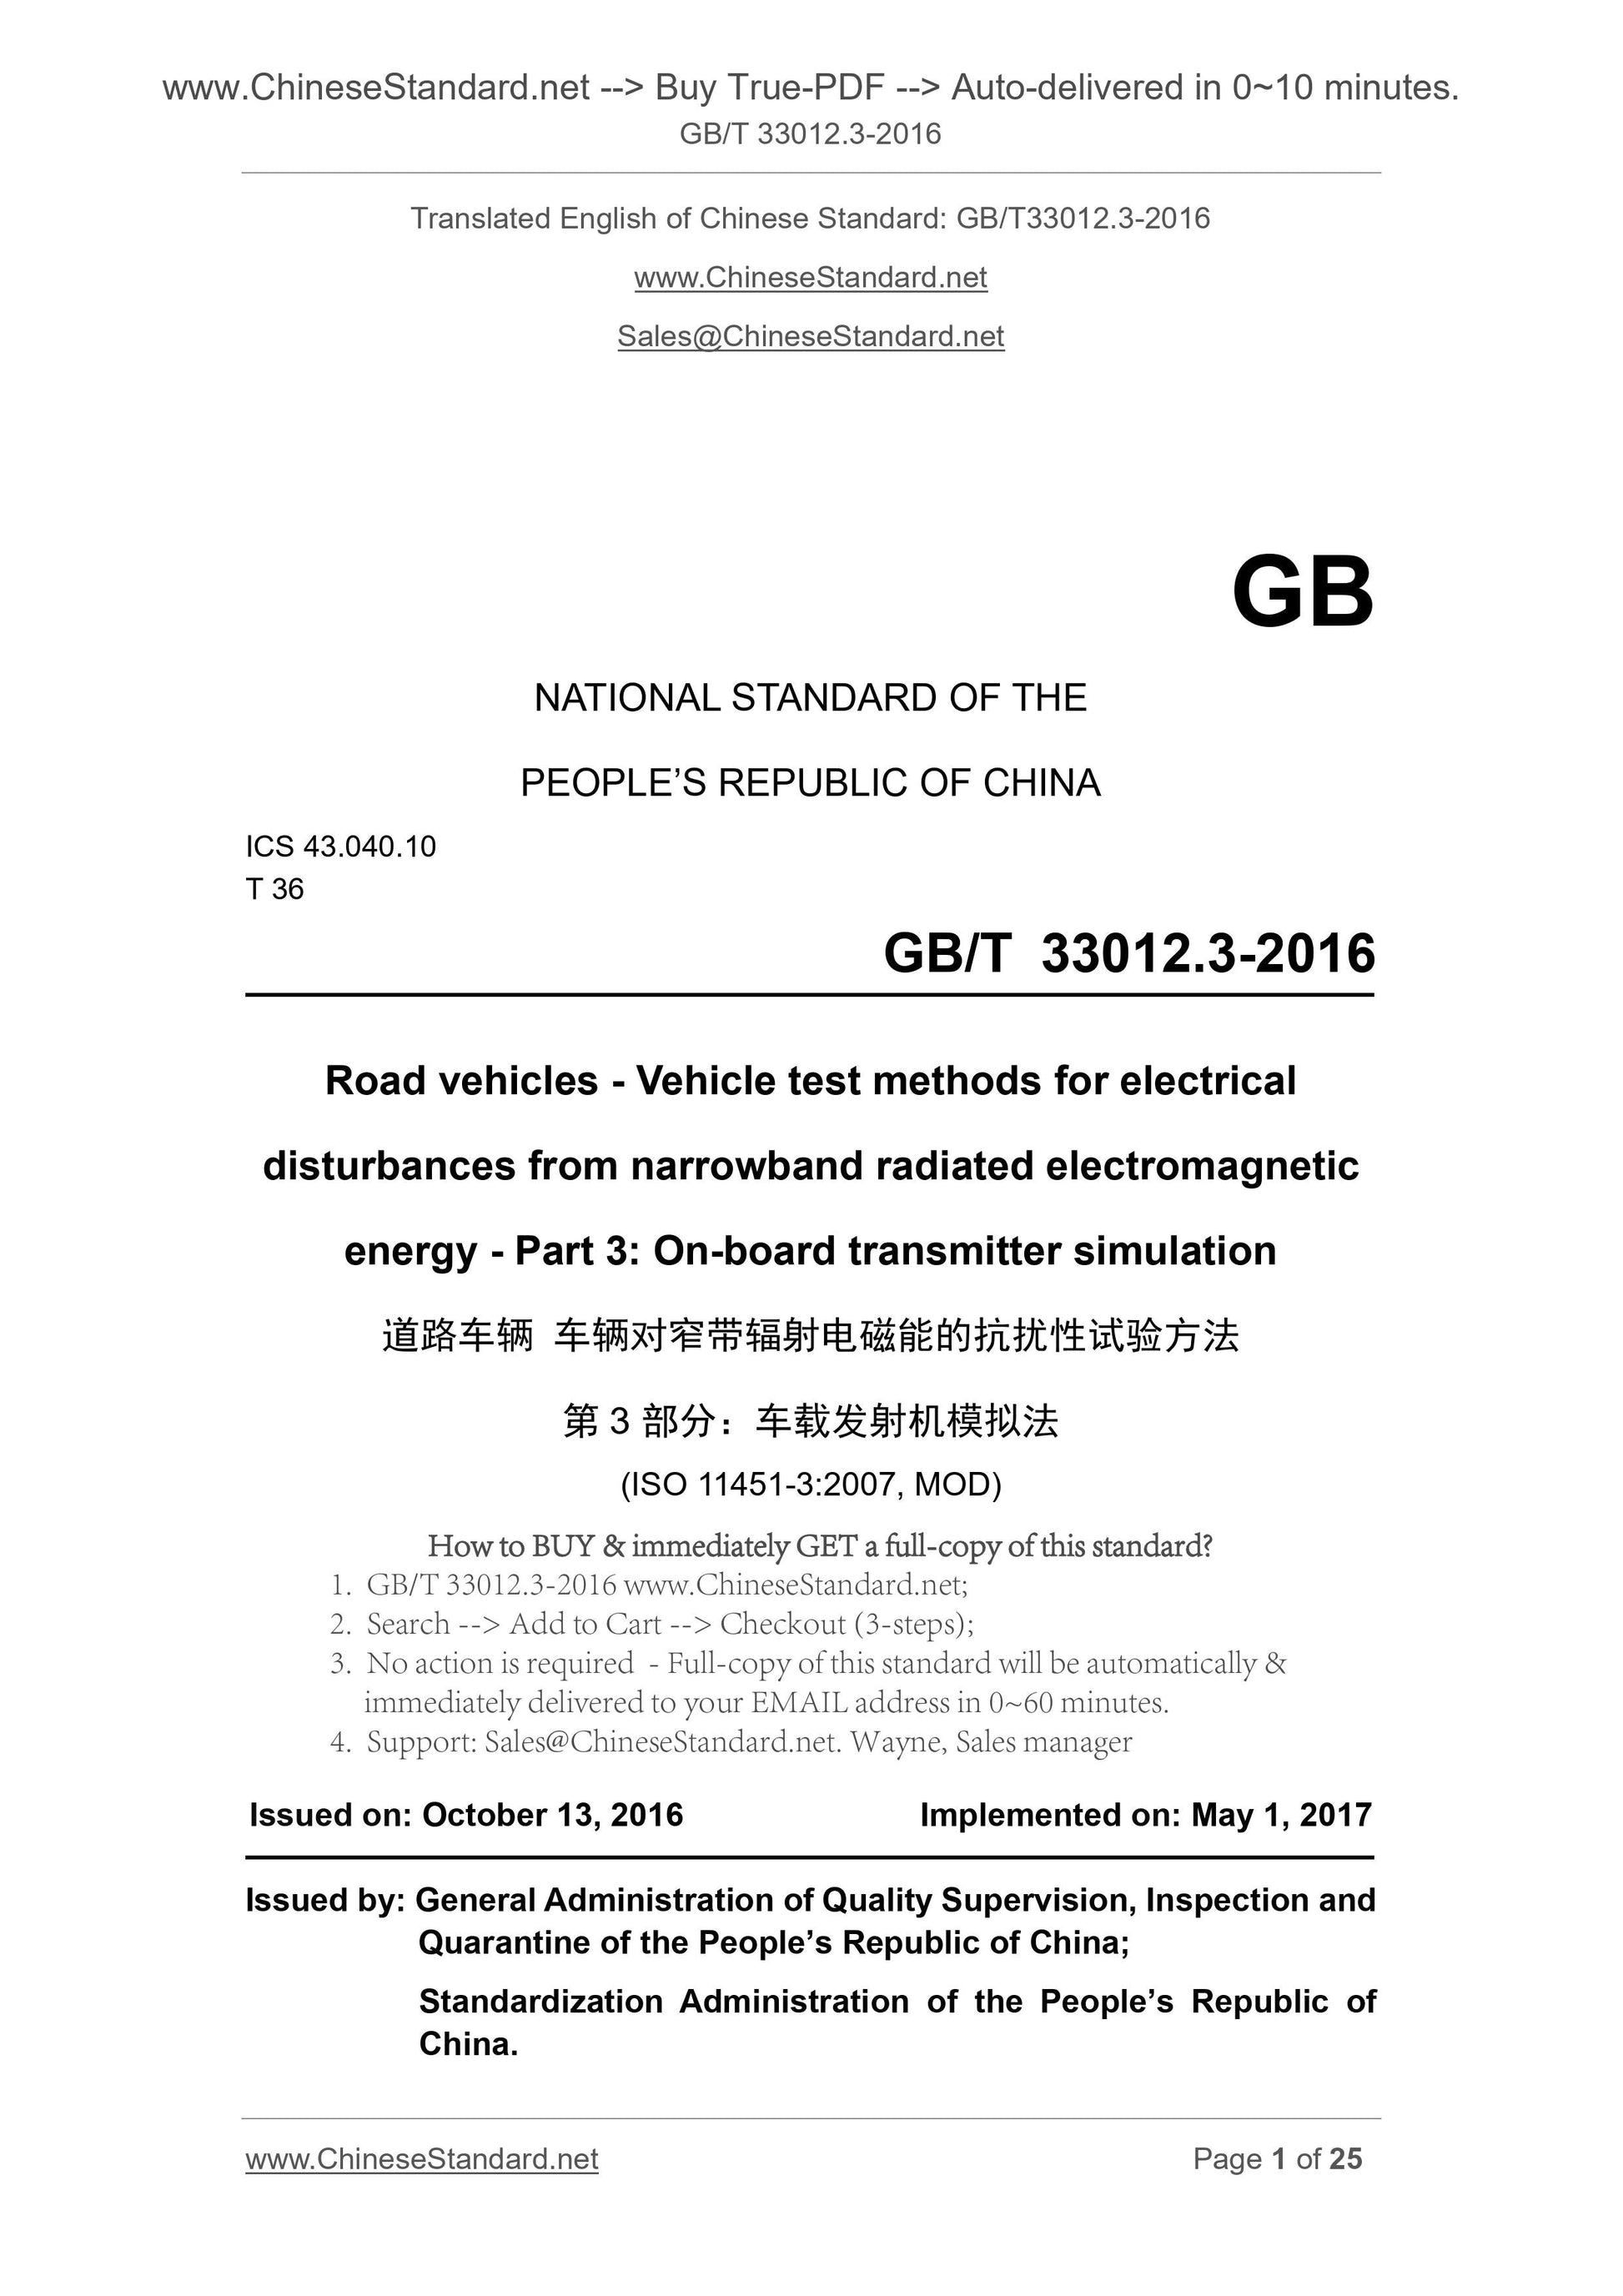 GB/T 33012.3-2016 Page 1